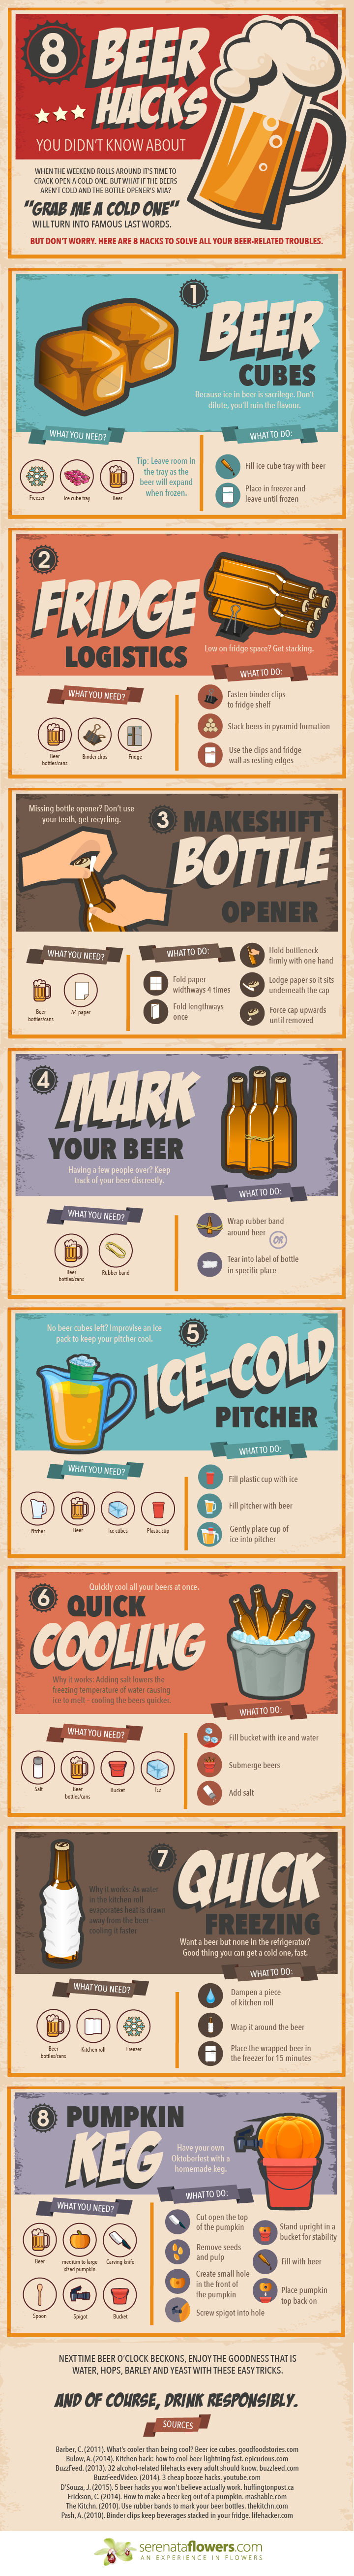 8 Beer Hacks You Didn't Know About